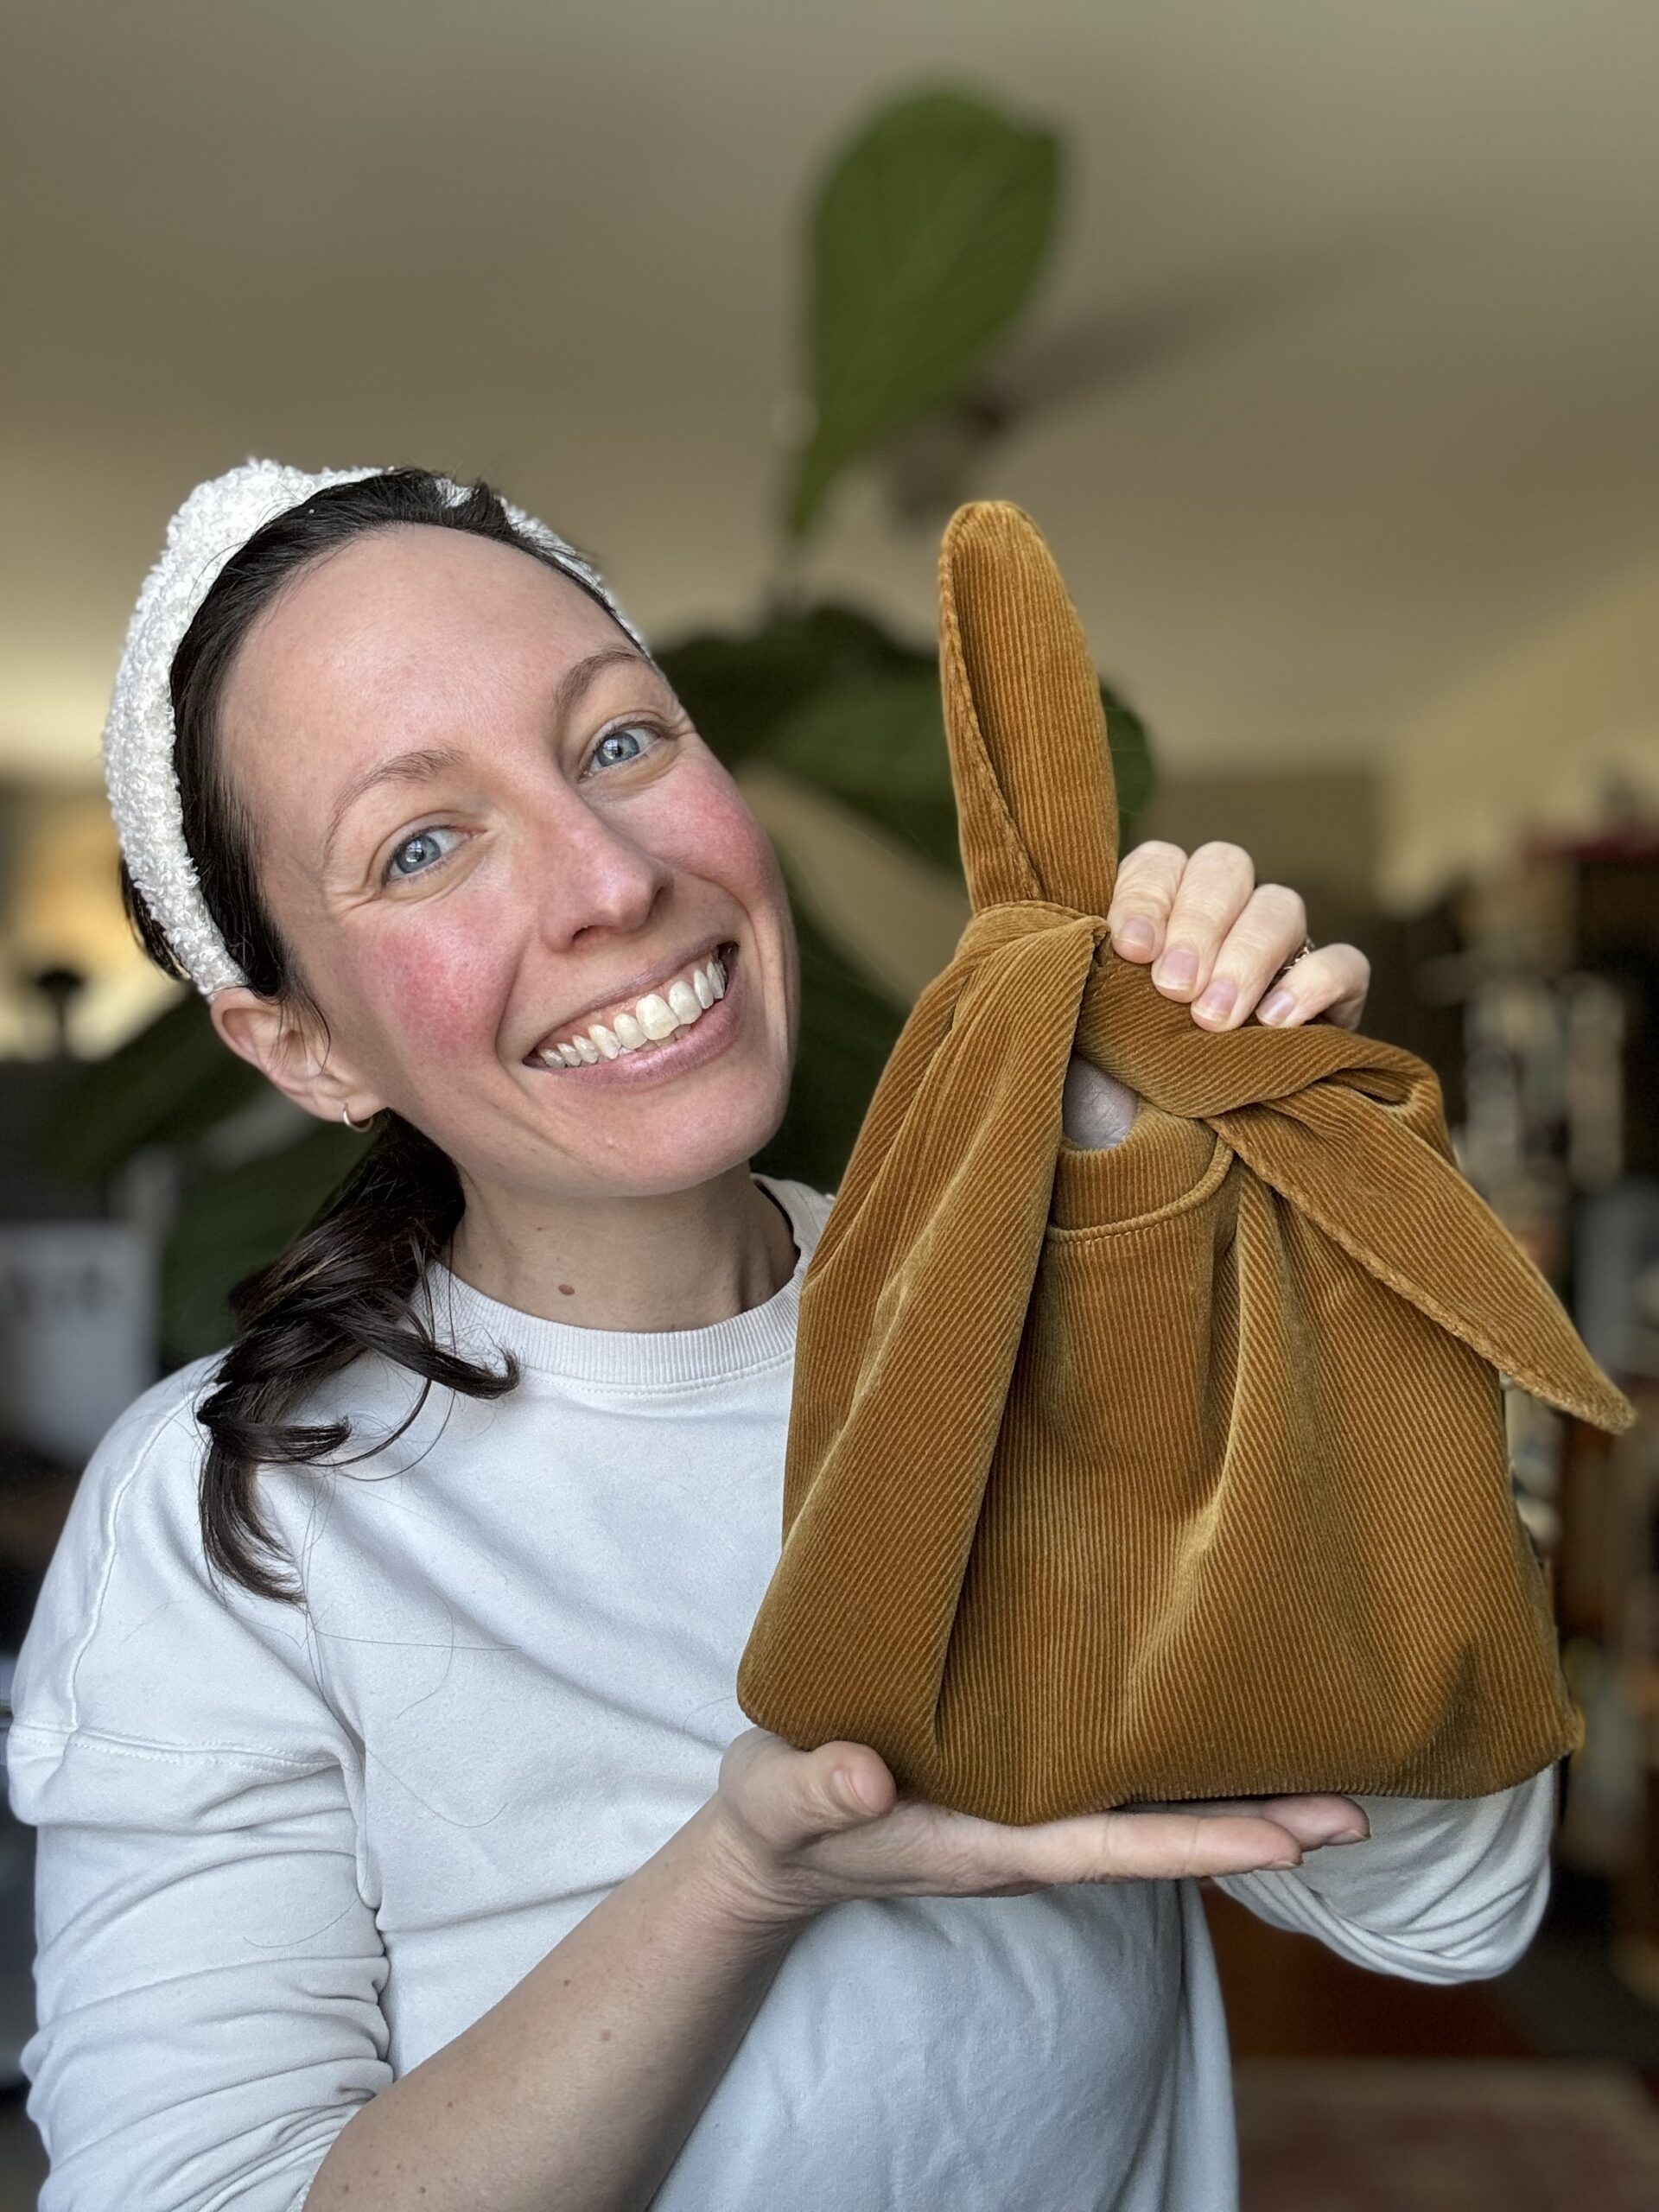 A smiling woman holding up a brown fabric bag with a knot.